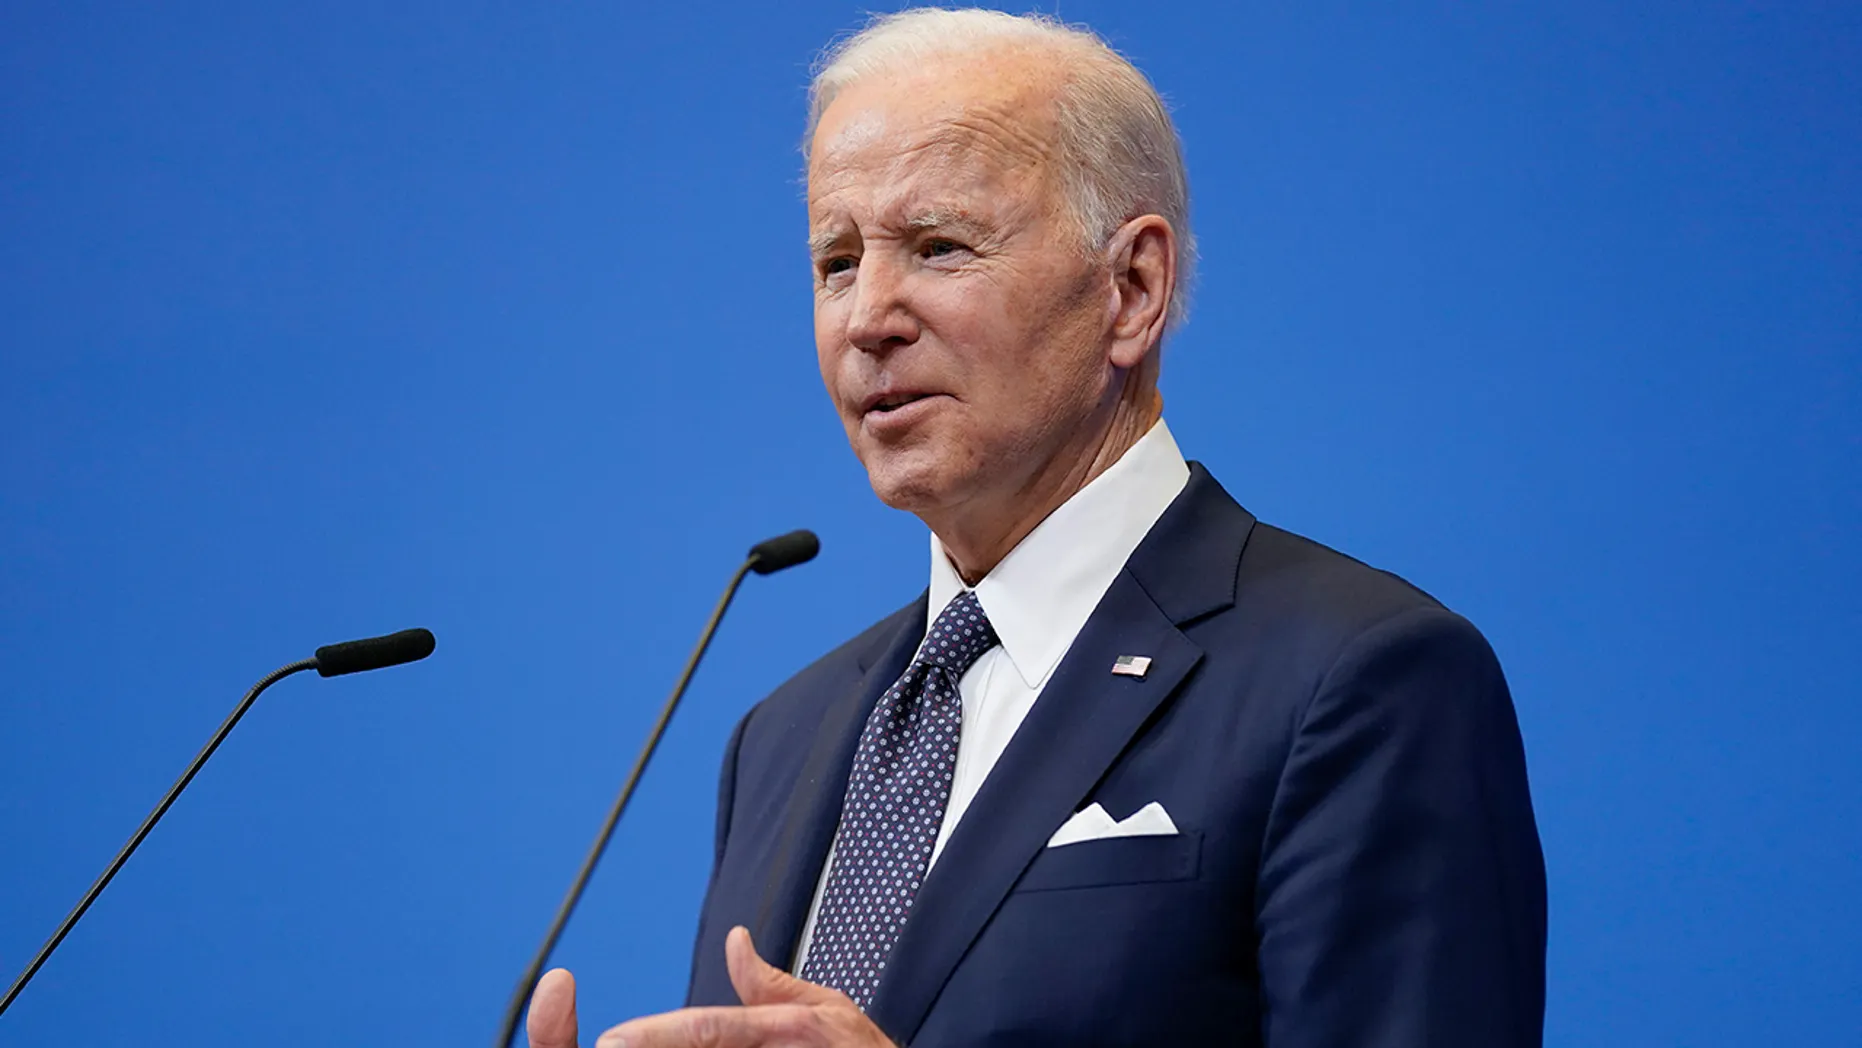 Biden banking on Beijing thirst for world market: 'China understands its economic future is…tied to the West'